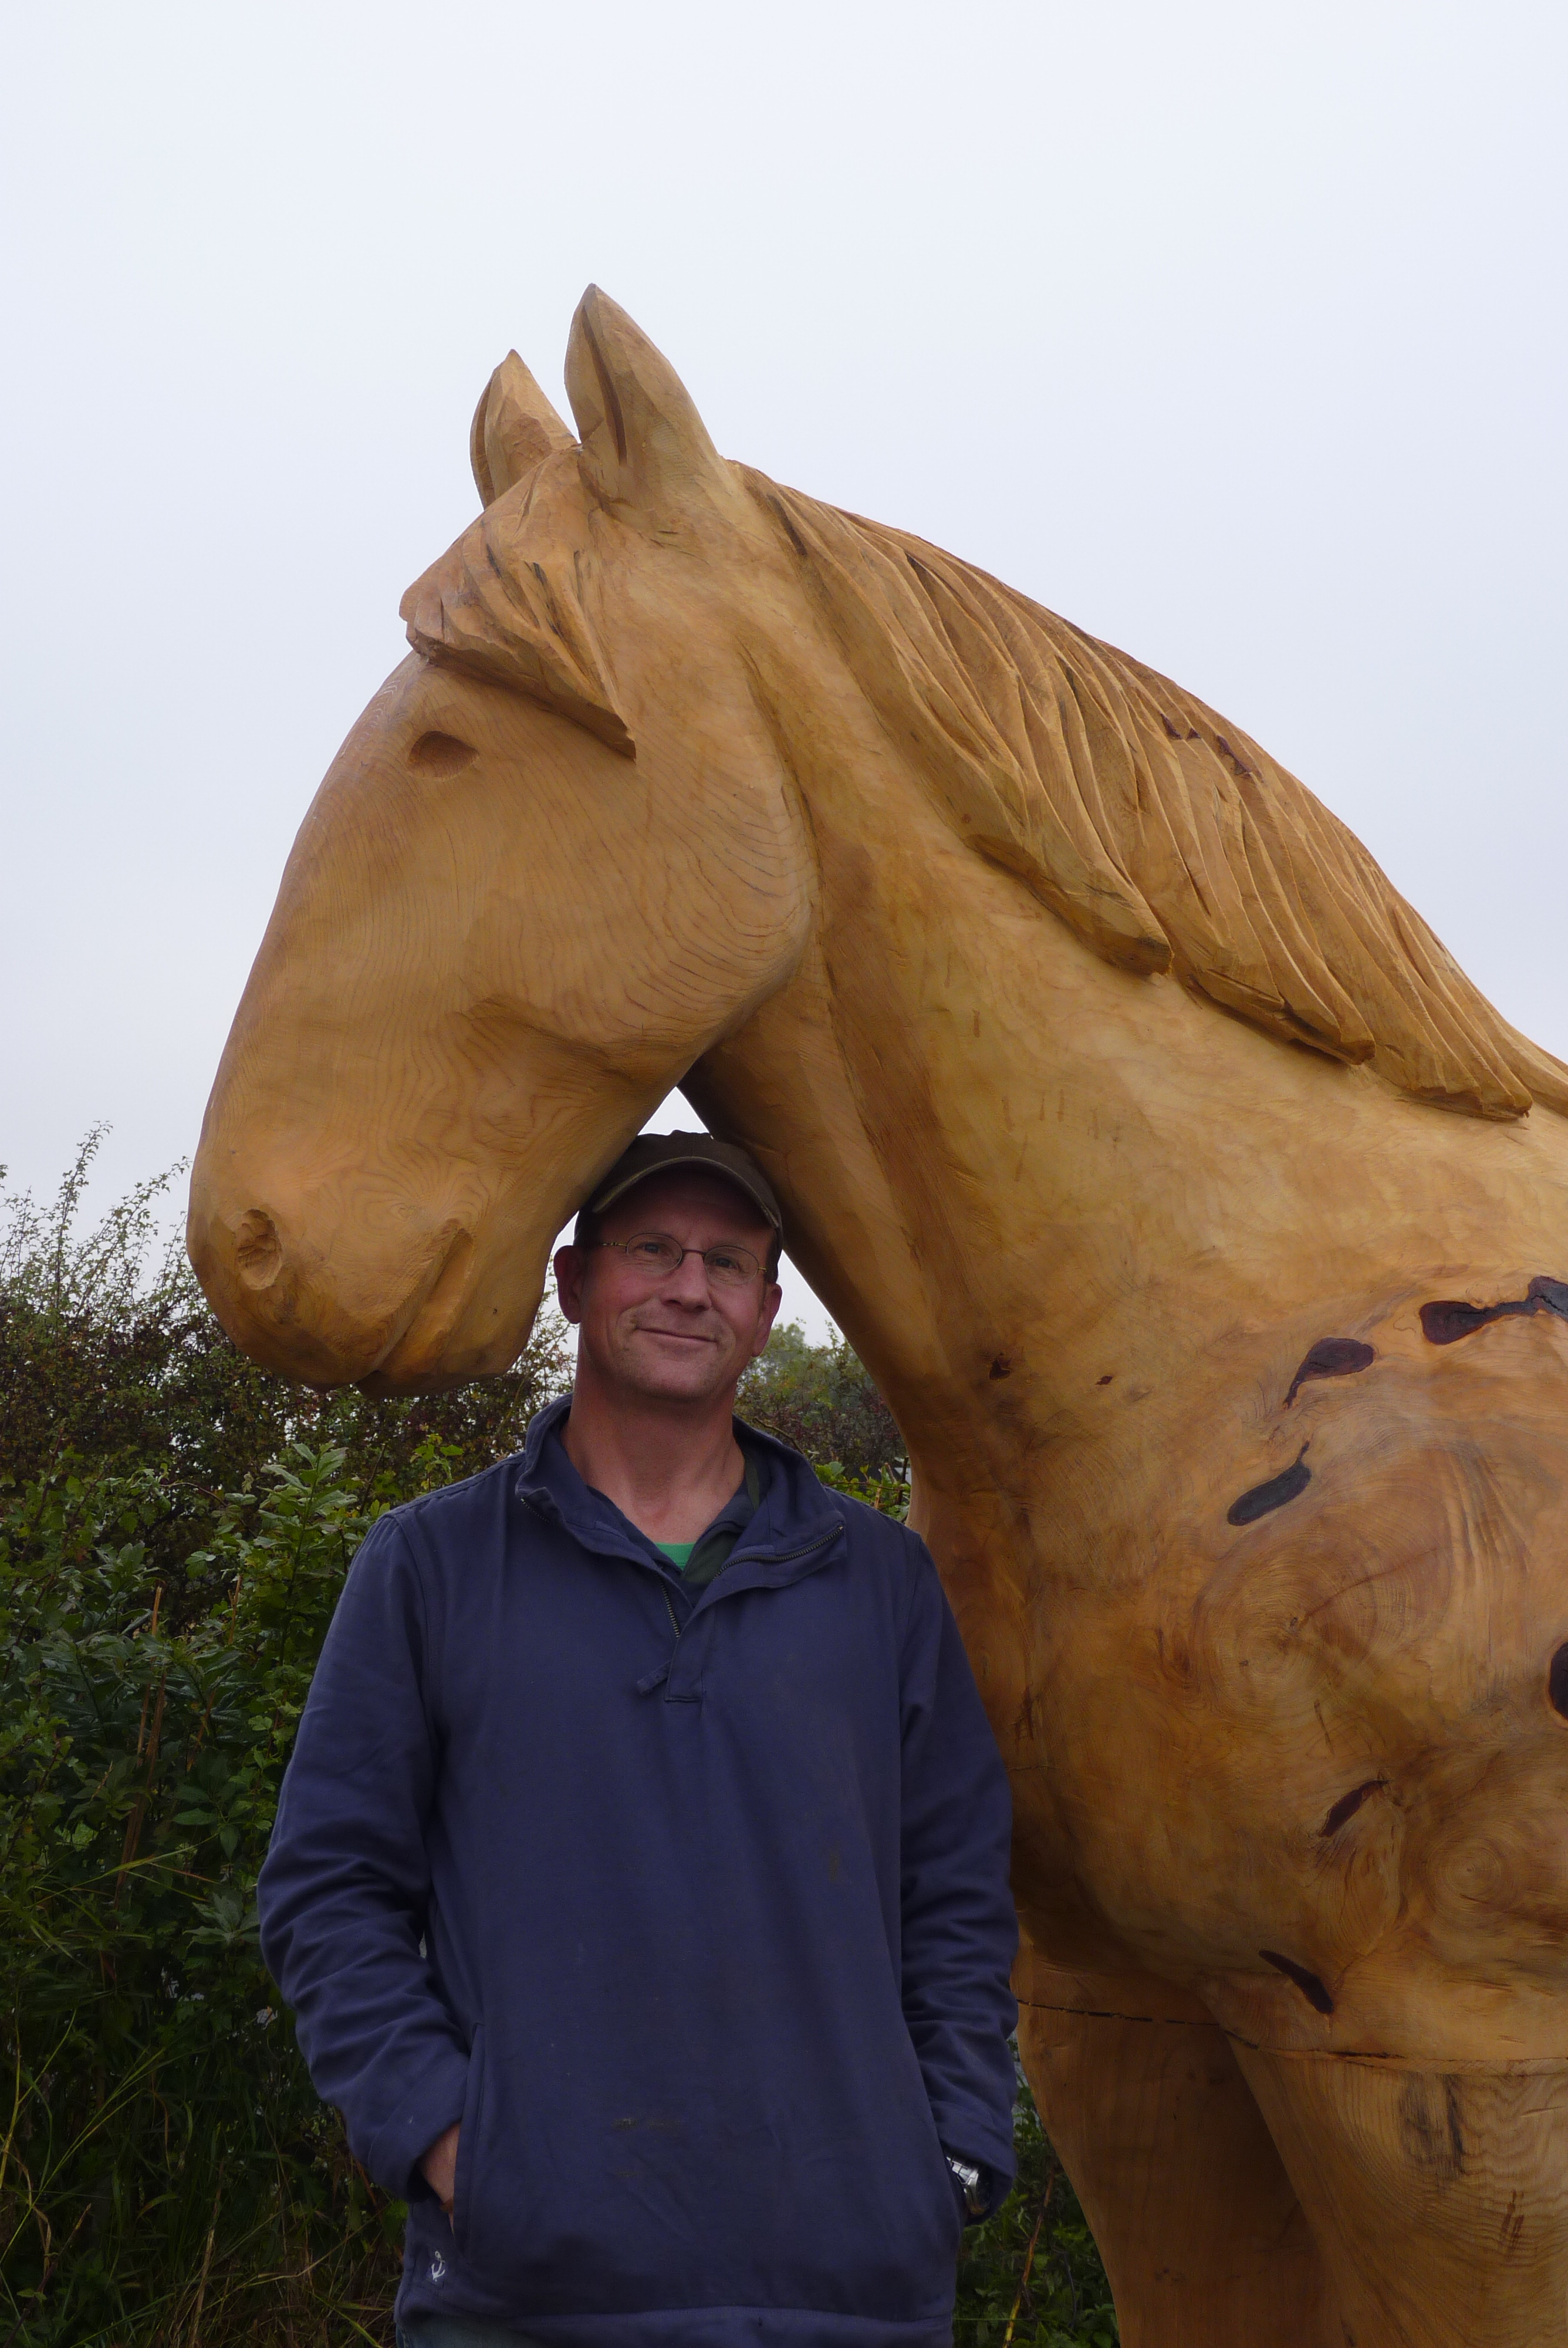 Nigel Sardeson, one of the Artists for the St Barnabas HeART Trail. Man with dark coloured top standing with life-sized sculpture of horse.